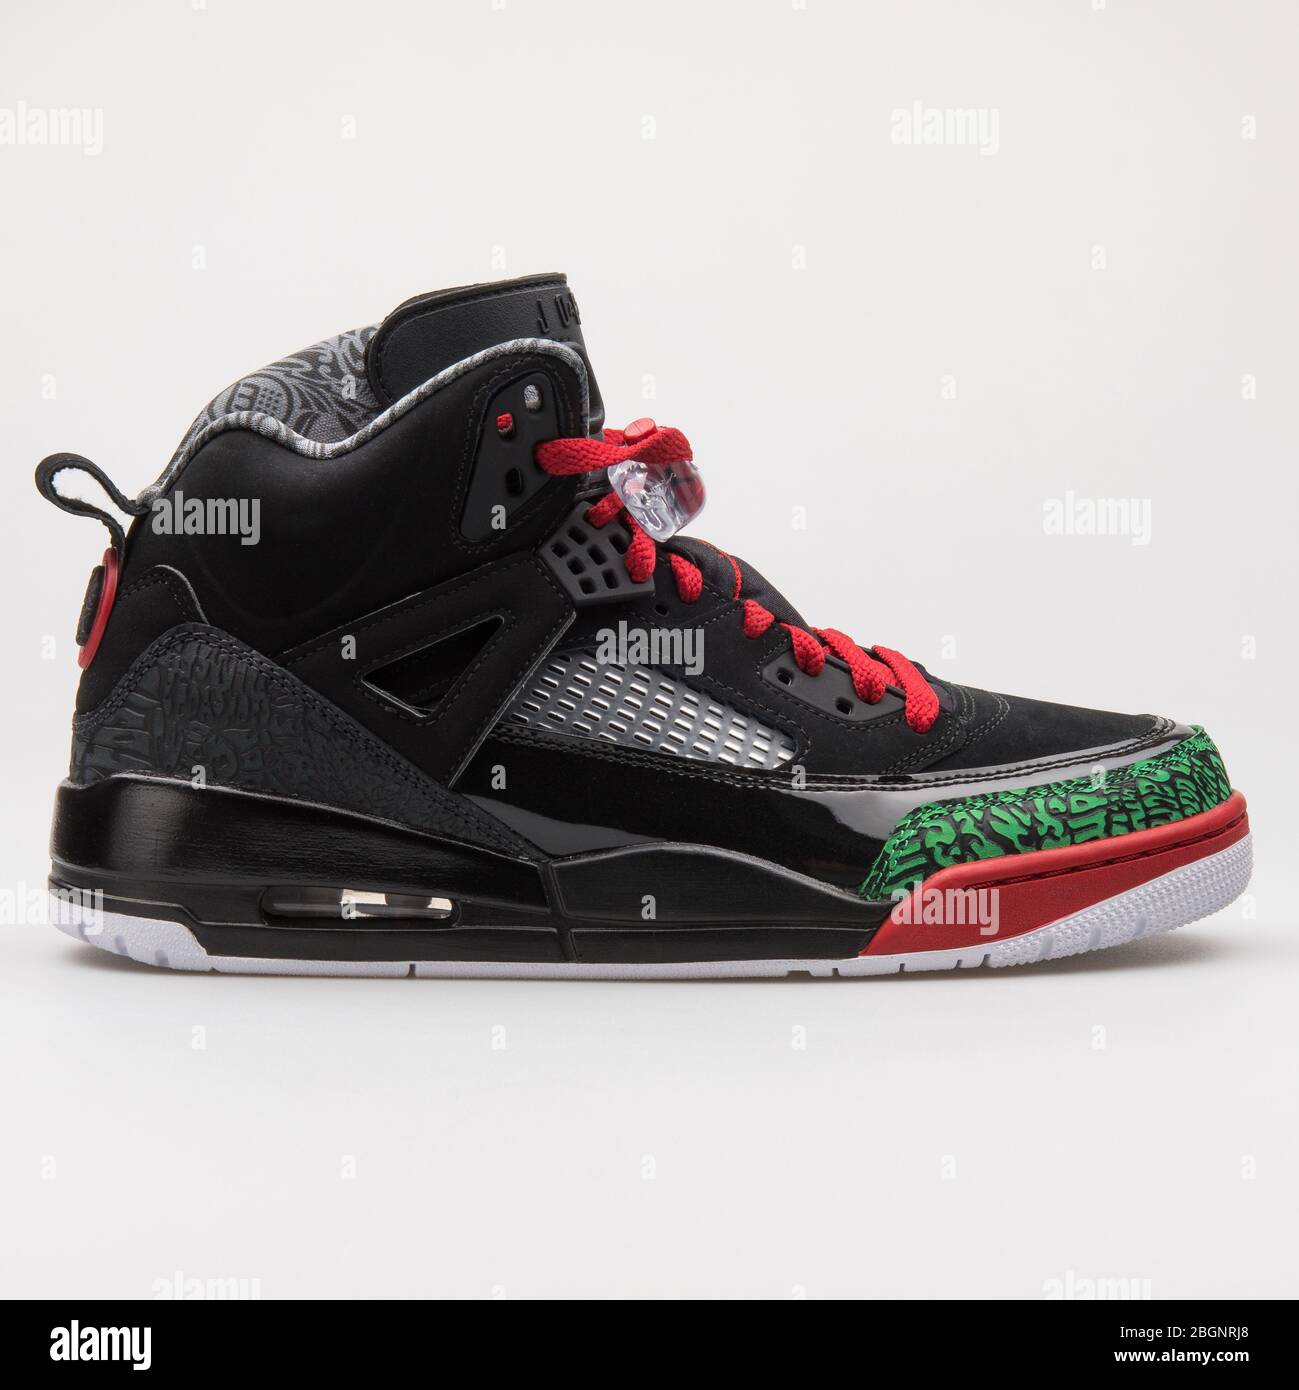 VIENNA, AUSTRIA - AUGUST 24, 2017: Nike Air Jordan Spizike black, green and  red sneaker on white background Stock Photo - Alamy